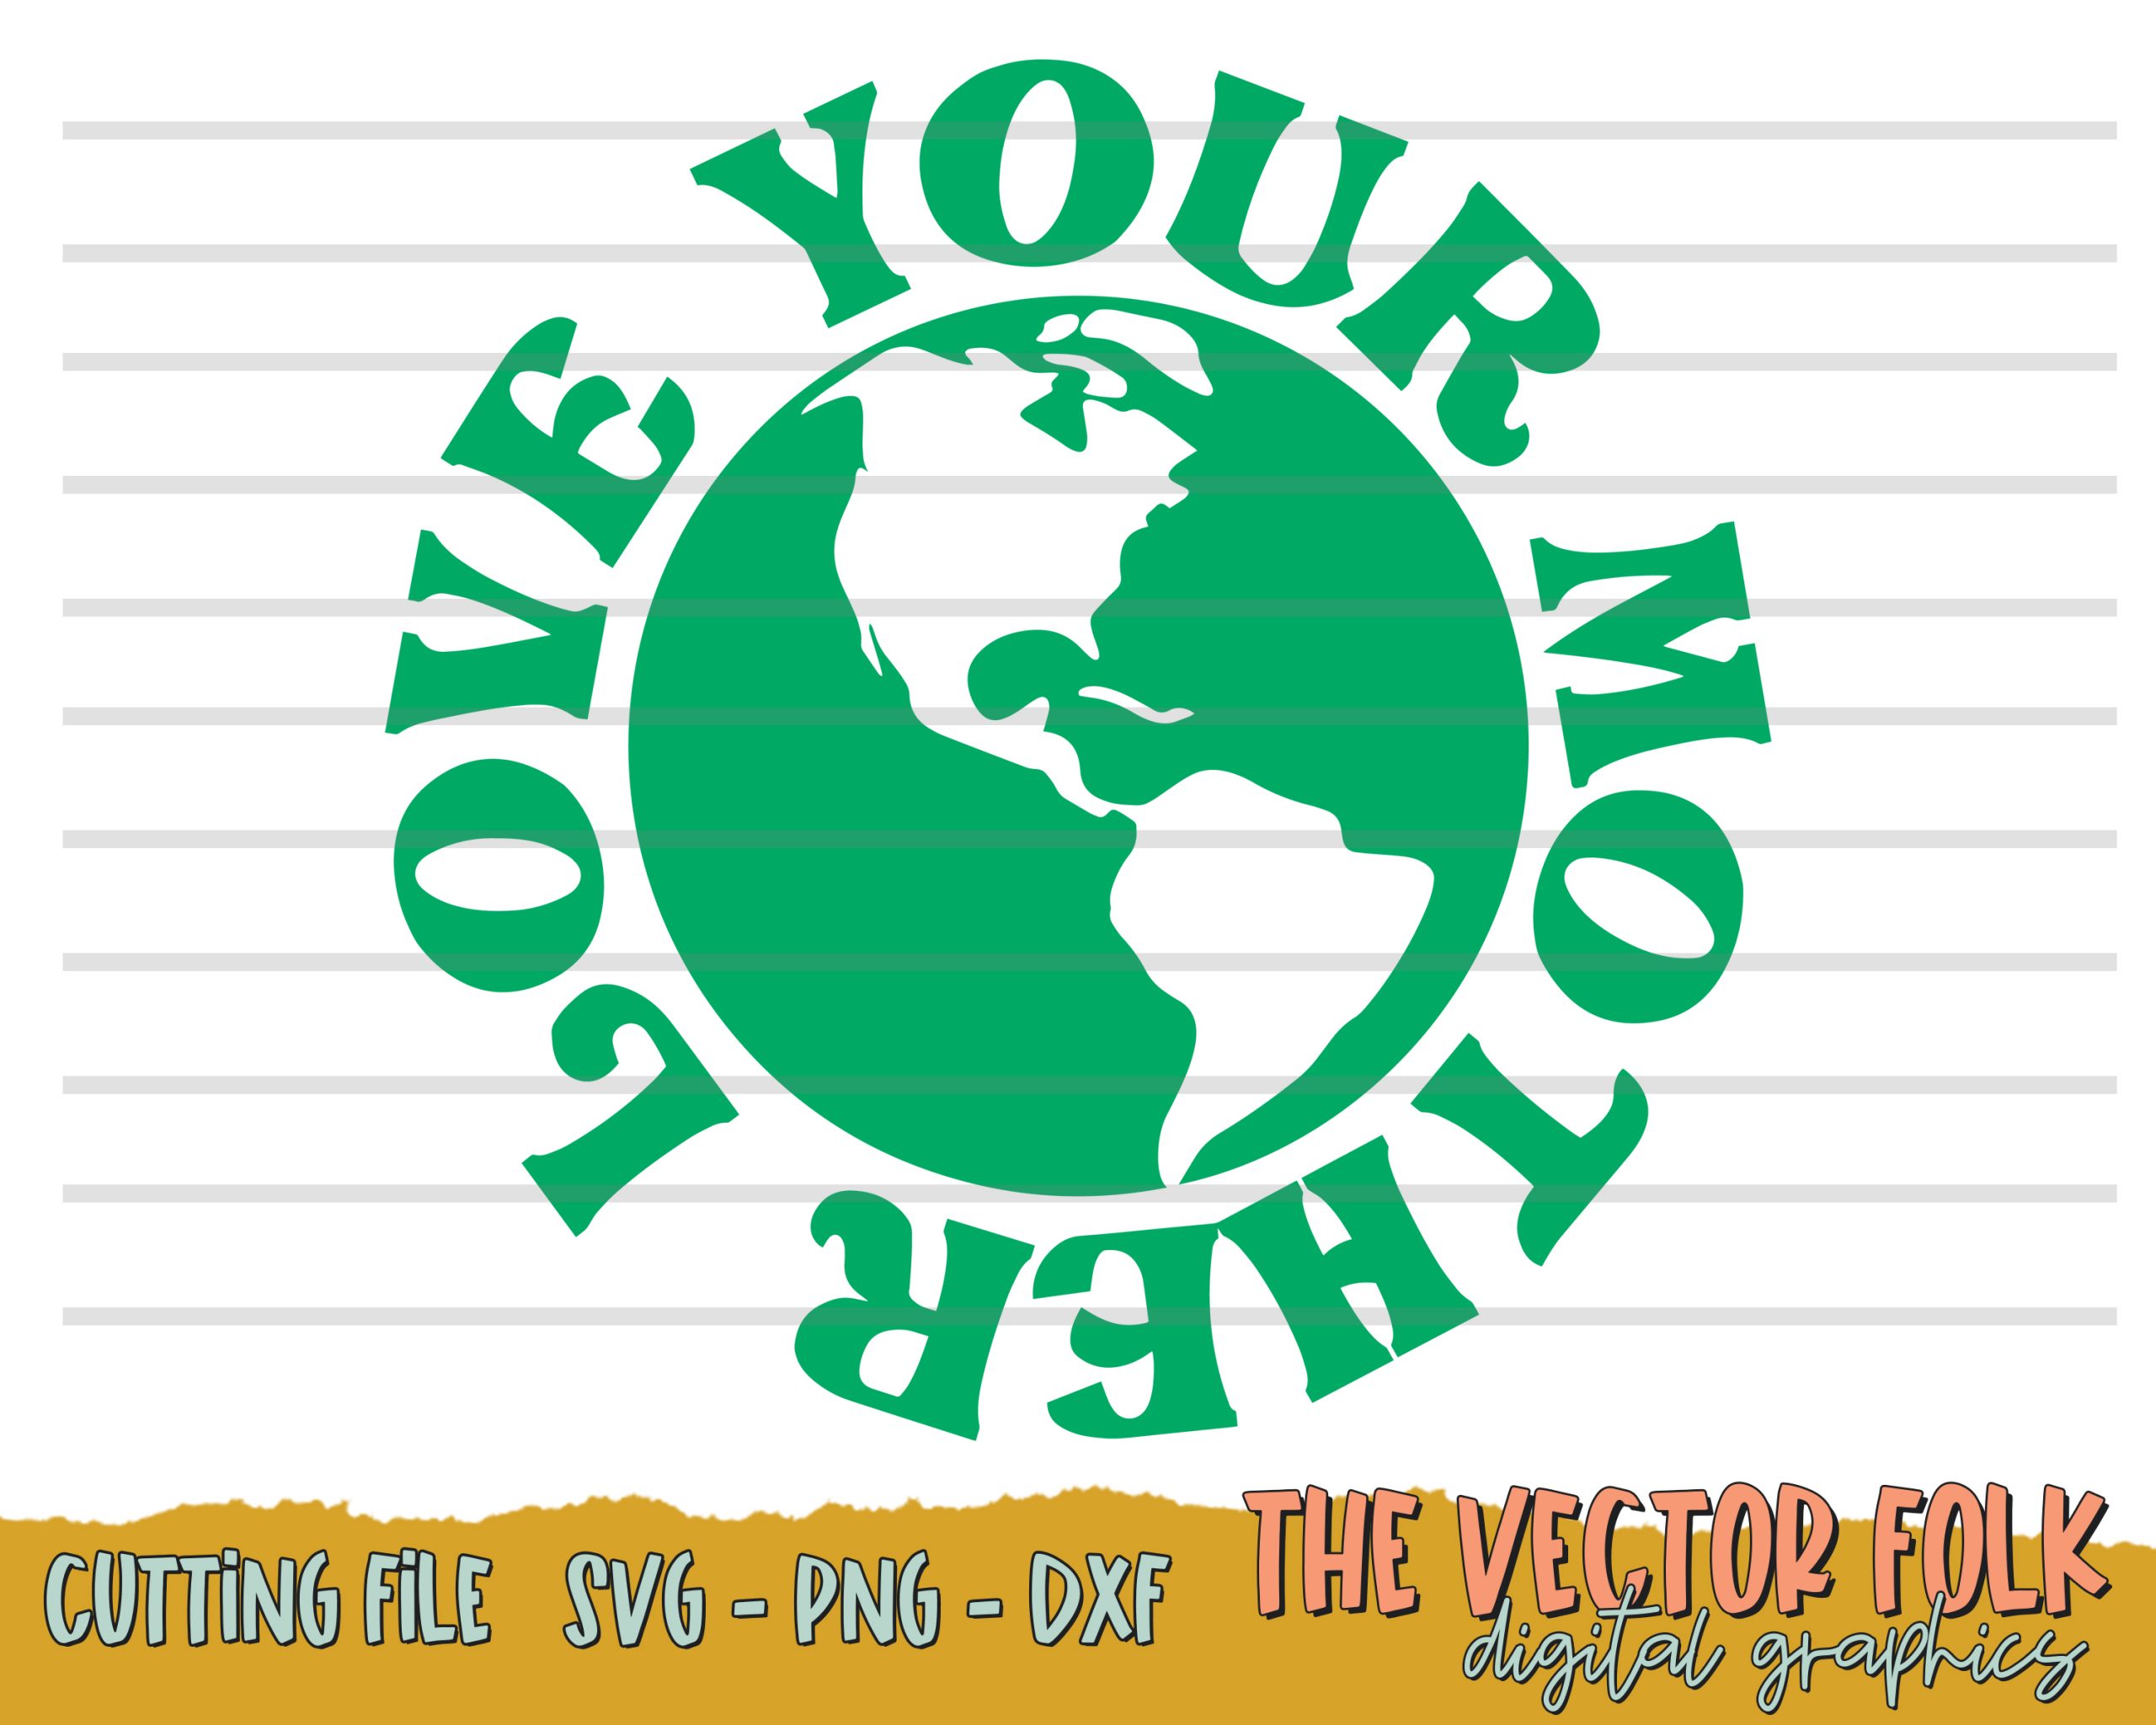 Download Love Your Mother SVG, DXF and PNG - THE SOUTHERN FOLK